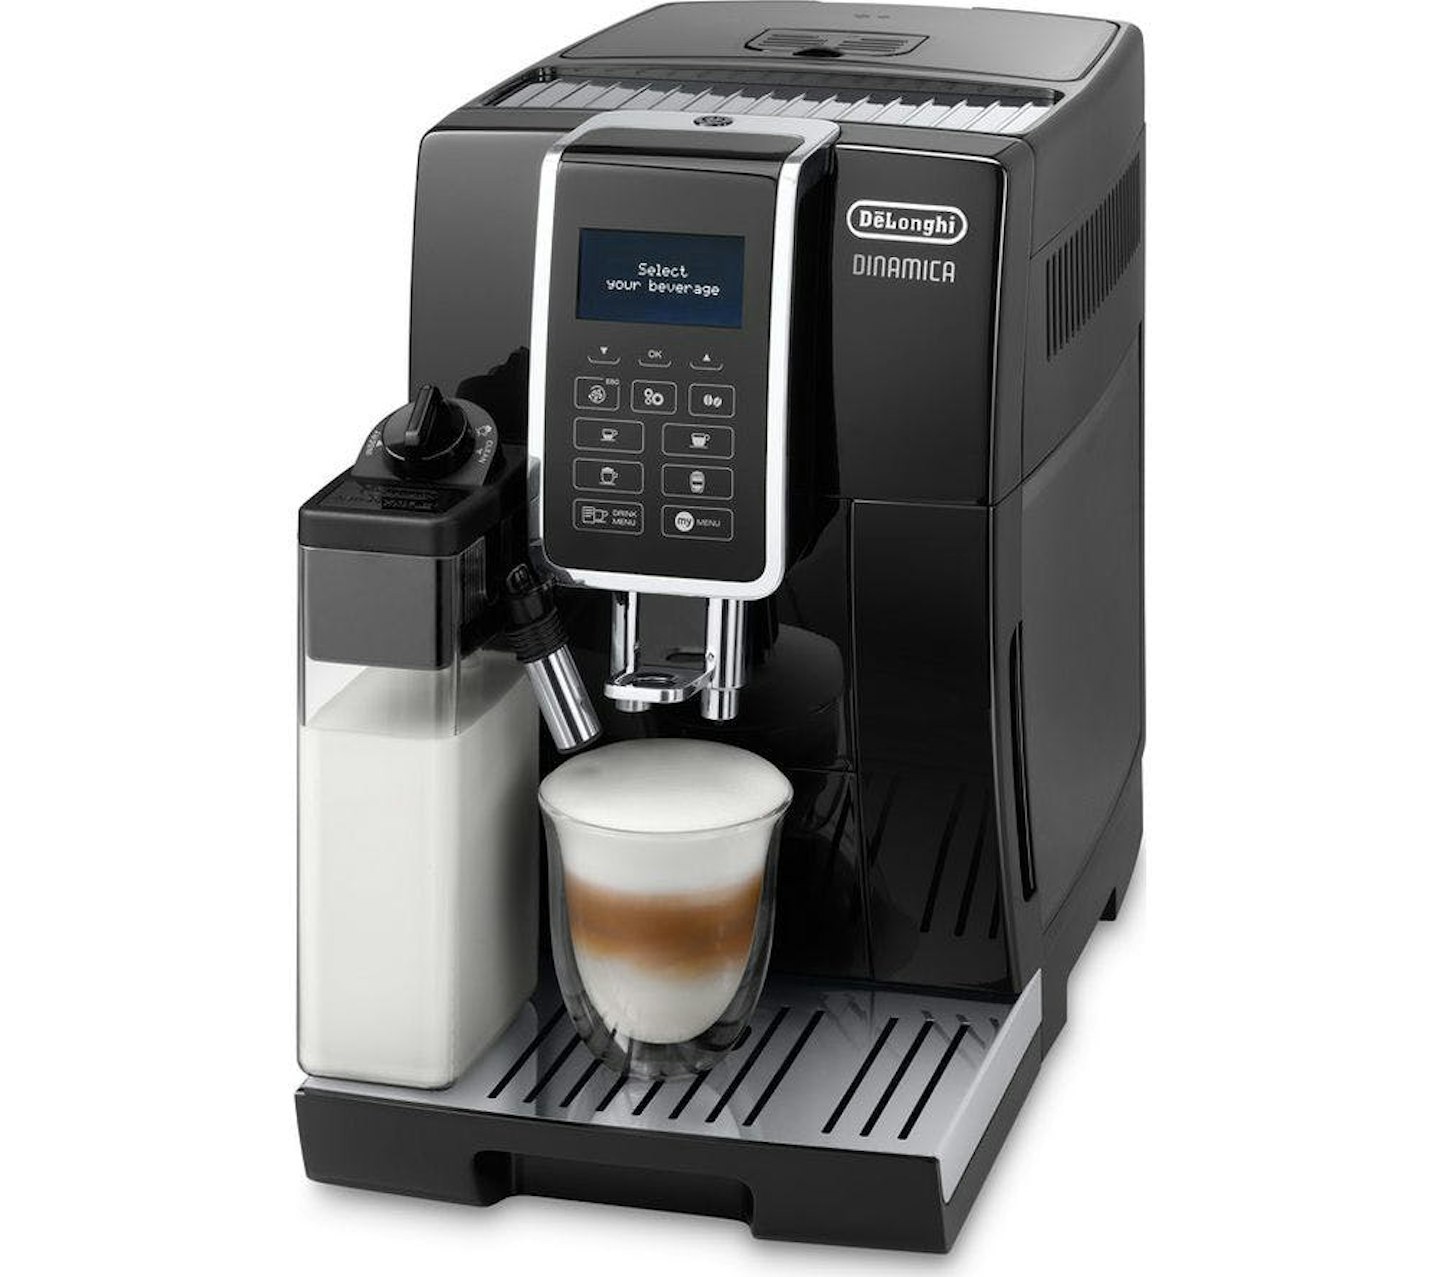 The best bean-to-cup coffee machines: De'Longhi Dinamica Bean to Cup Coffee Machine